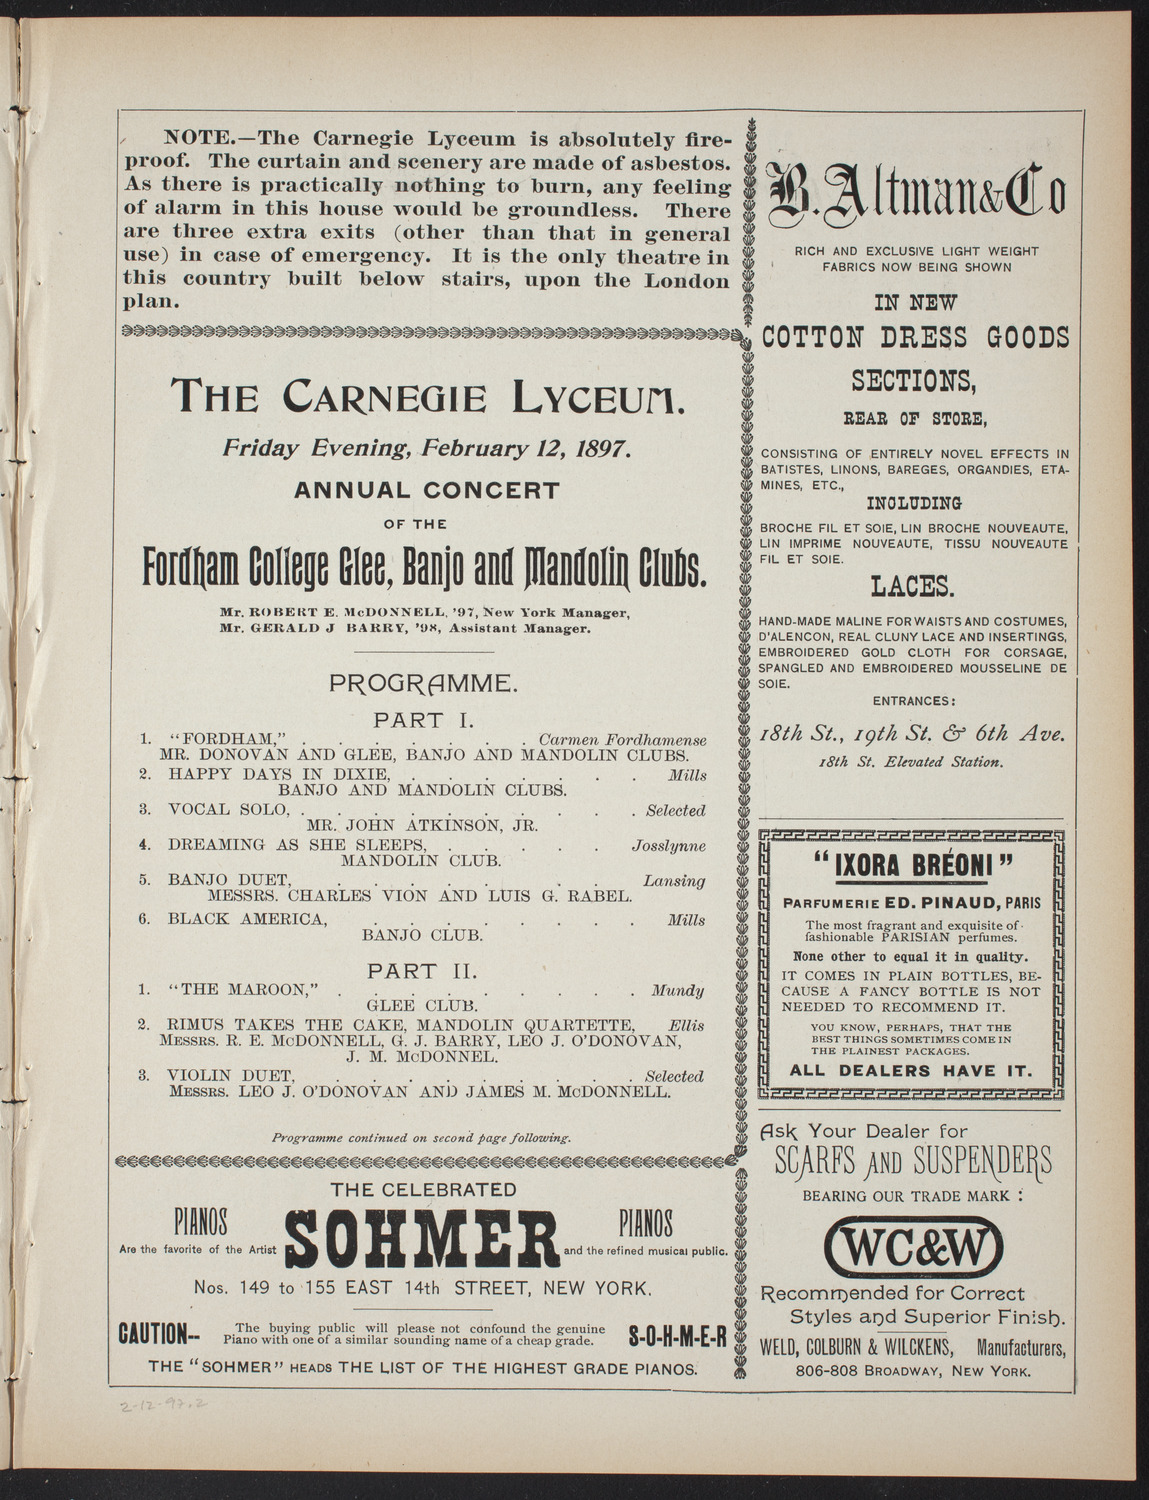 Fordham College Glee, Banjo and Mandolin Clubs, February 12, 1897, program page 3